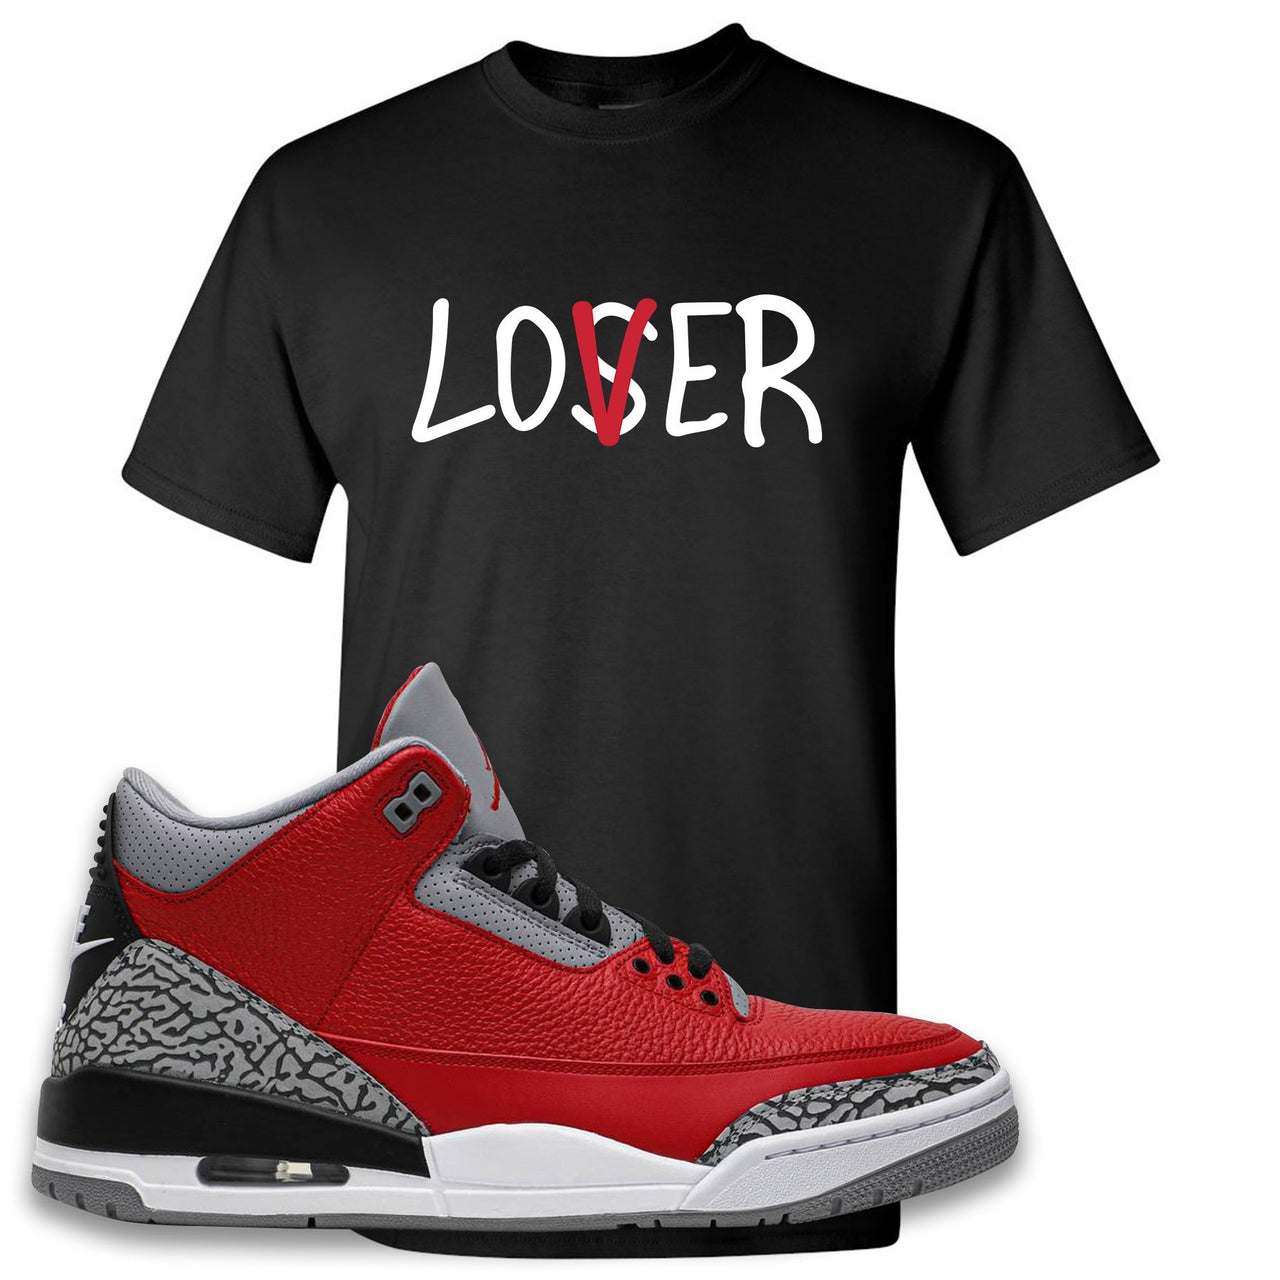 Jordan 3 Red Cement Chicago All-Star Sneaker Black T Shirt | Tees to match Jordan 3 All Star Red Cement Shoes | Lover